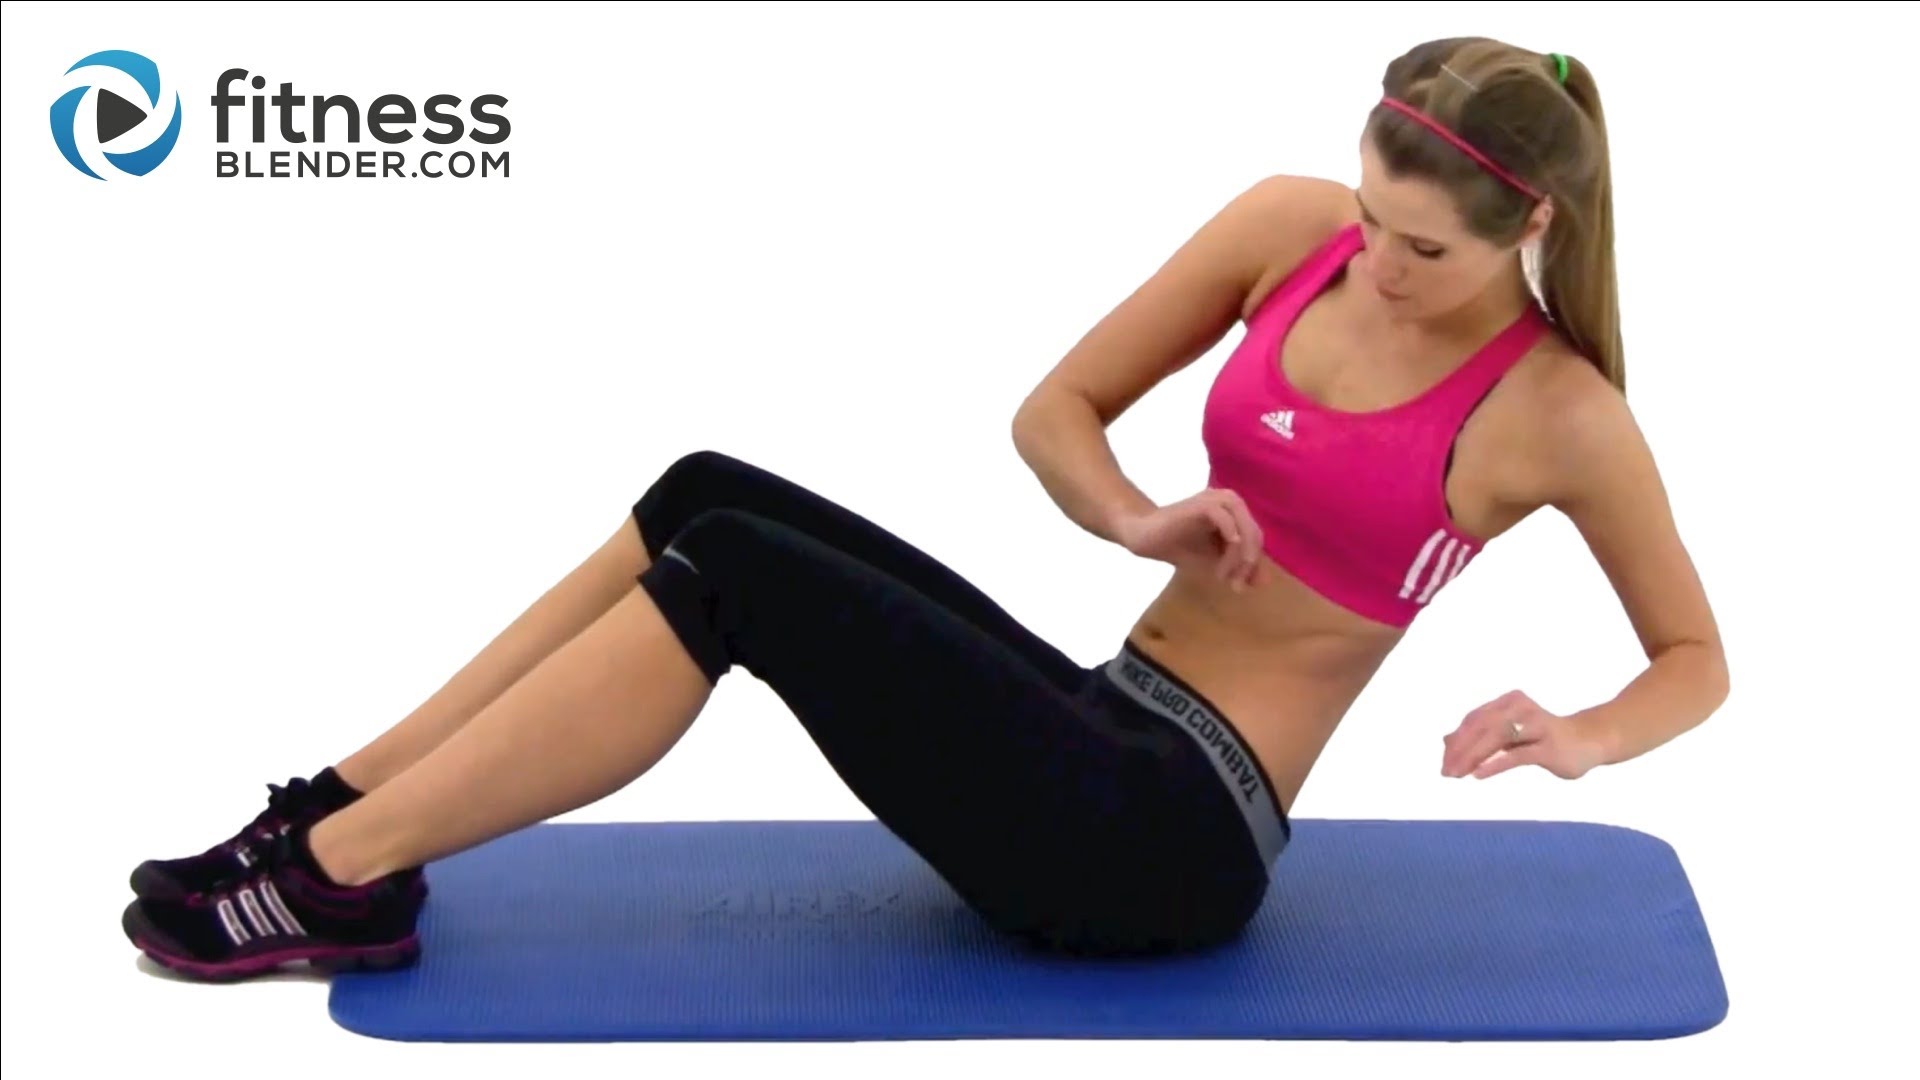 10 Min Abs Workout -- At Home Abdominal and Oblique Exercises - YouTube